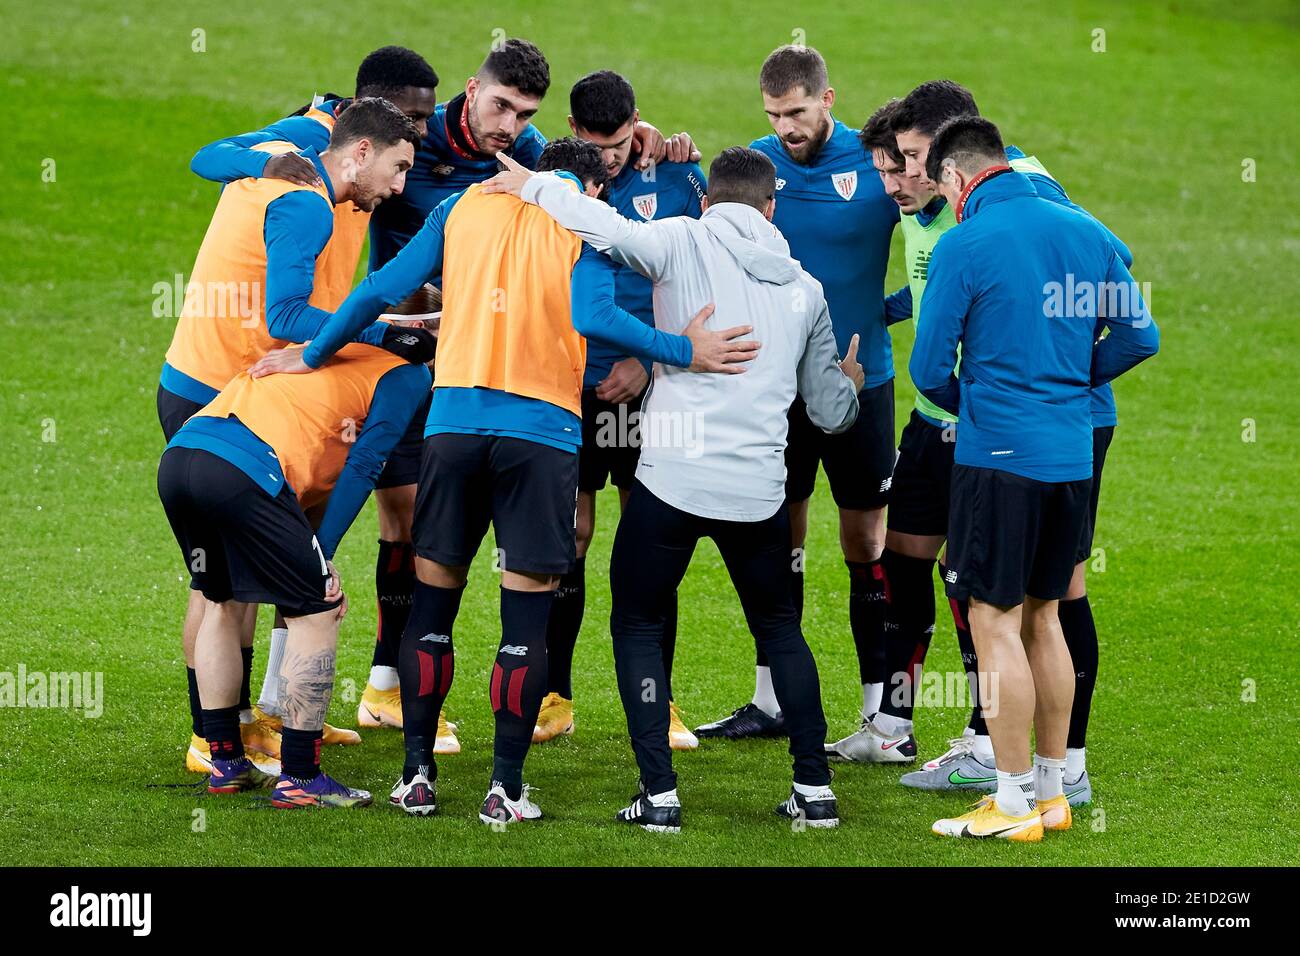 Bilbao, Spain. 06 January, 2021. Athletic Club players during receiving the latest advice before the La Liga match between Athletic Club Bilbao and FC Barcelona played at San Mames Stadium. Credit: Ion Alcoba/Capturasport/Alamy Live News Stock Photo